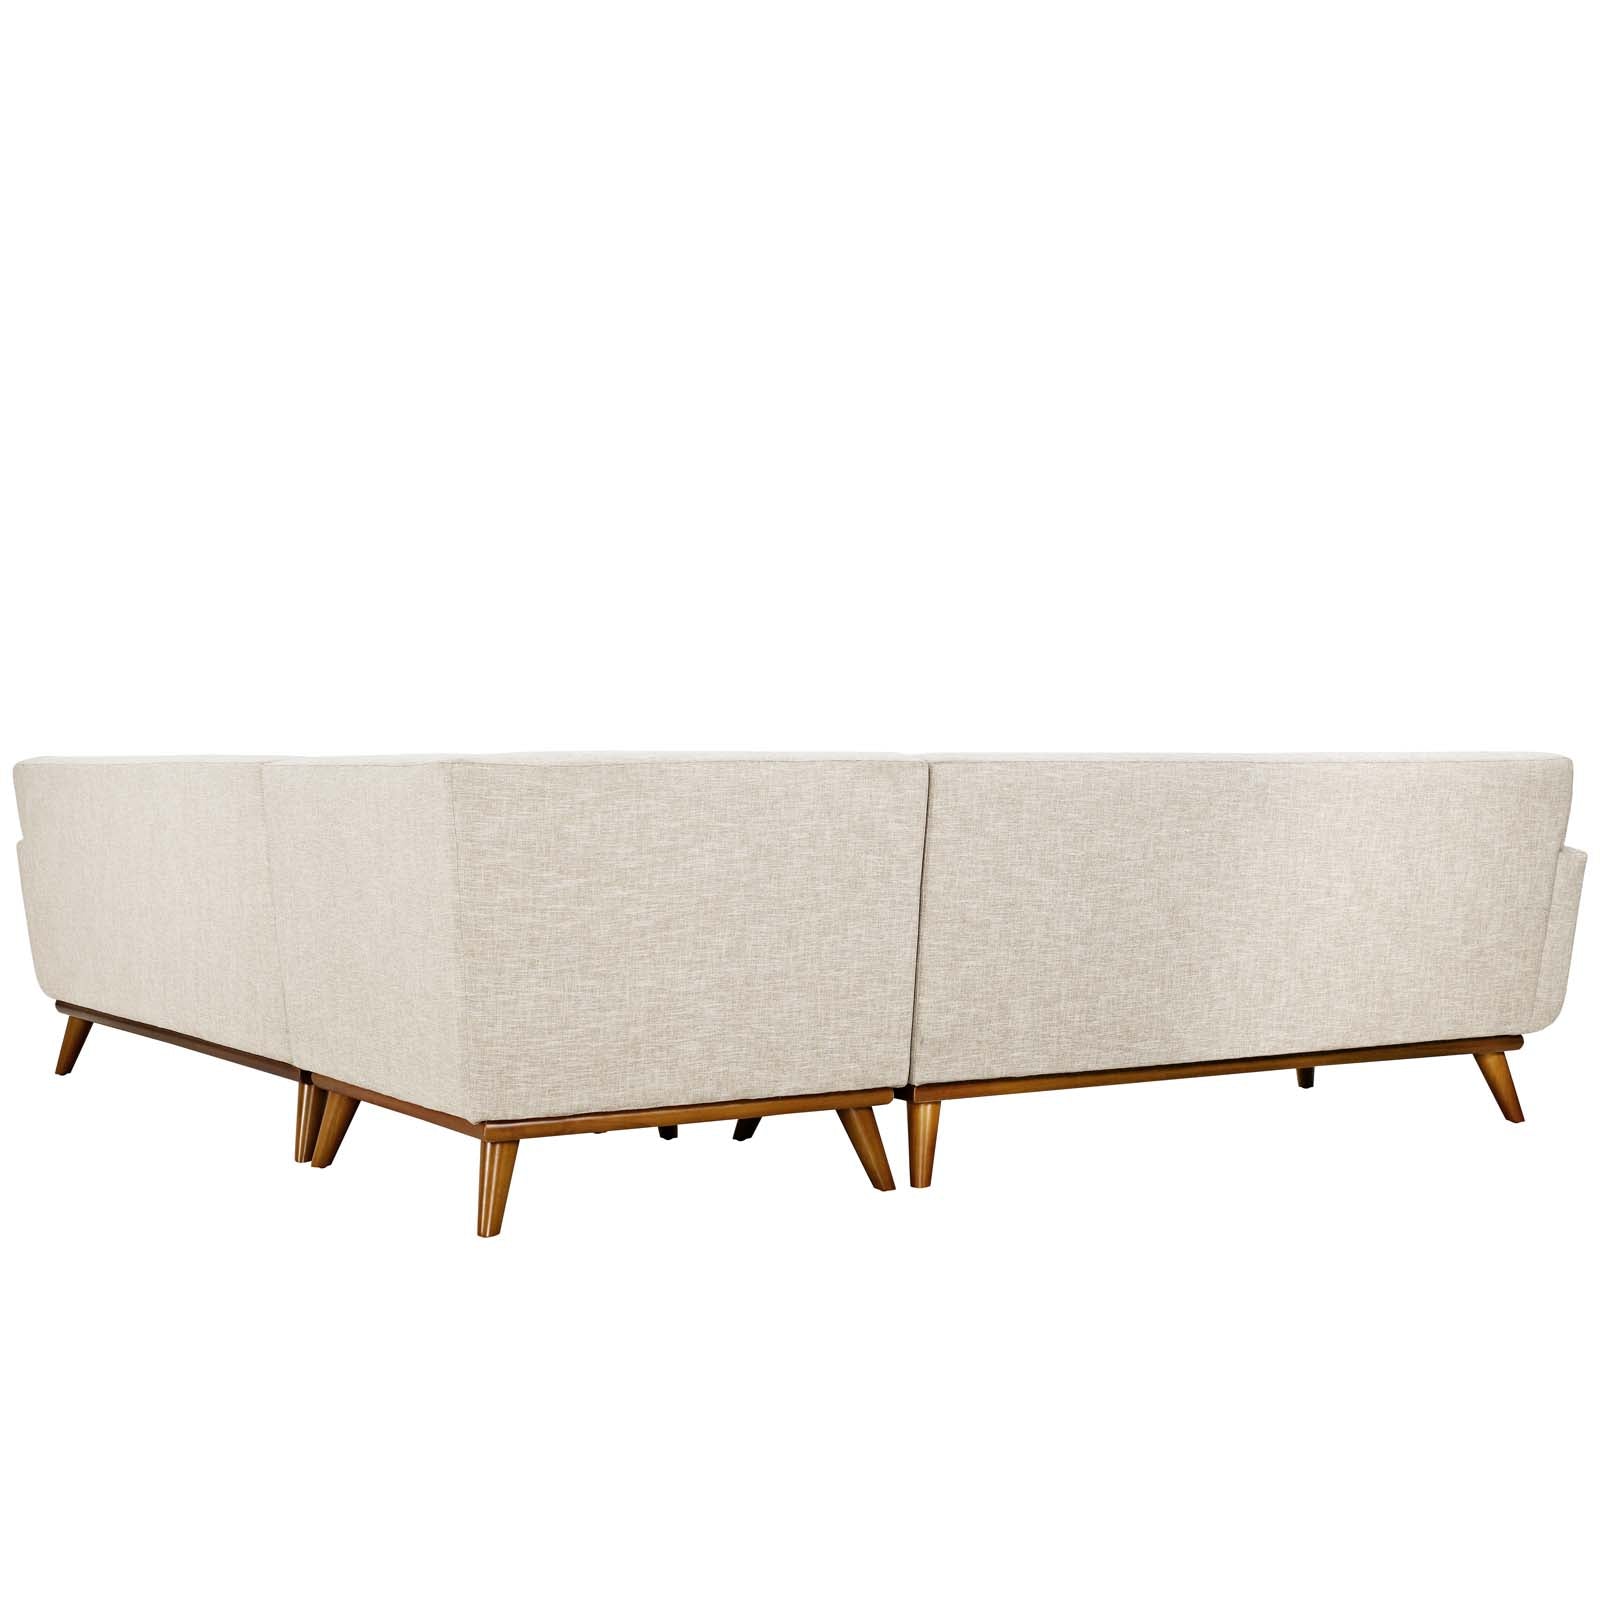 Modway Sectional Sofas - Engage-L-Shaped-Upholstered-Fabric-Sectional-Sofa-Beige